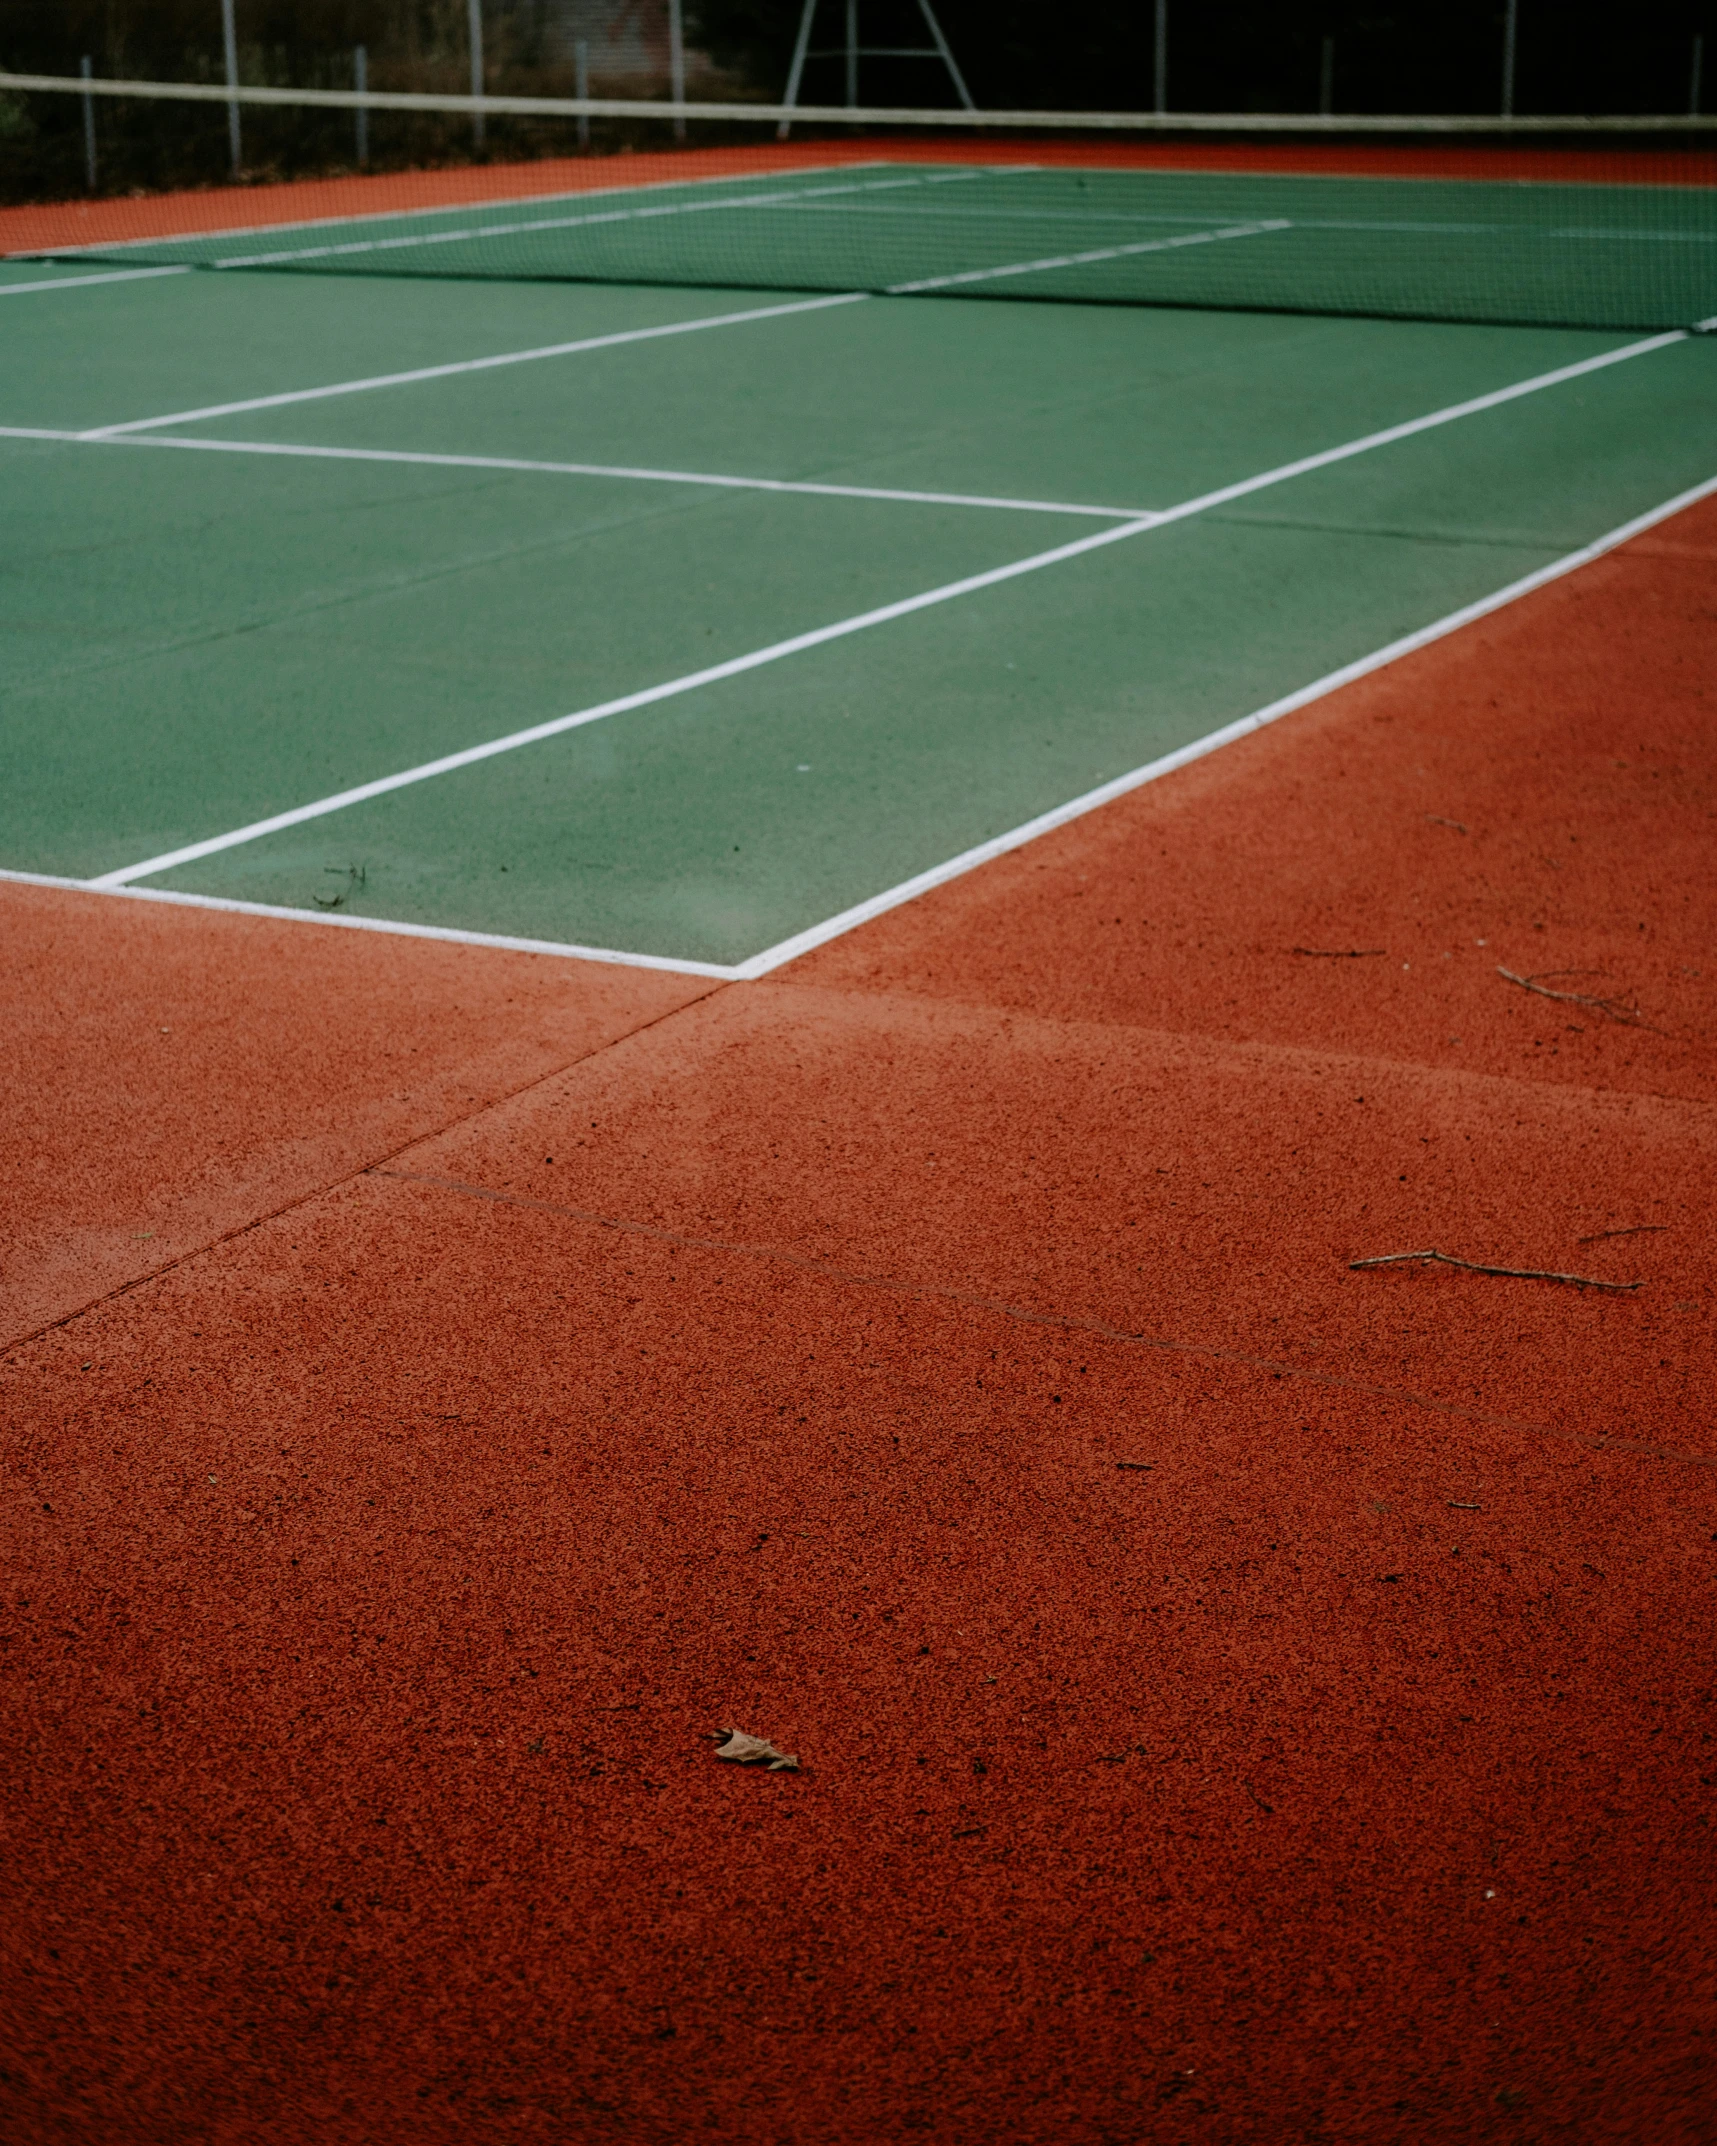 tennis court with black and white lines lines